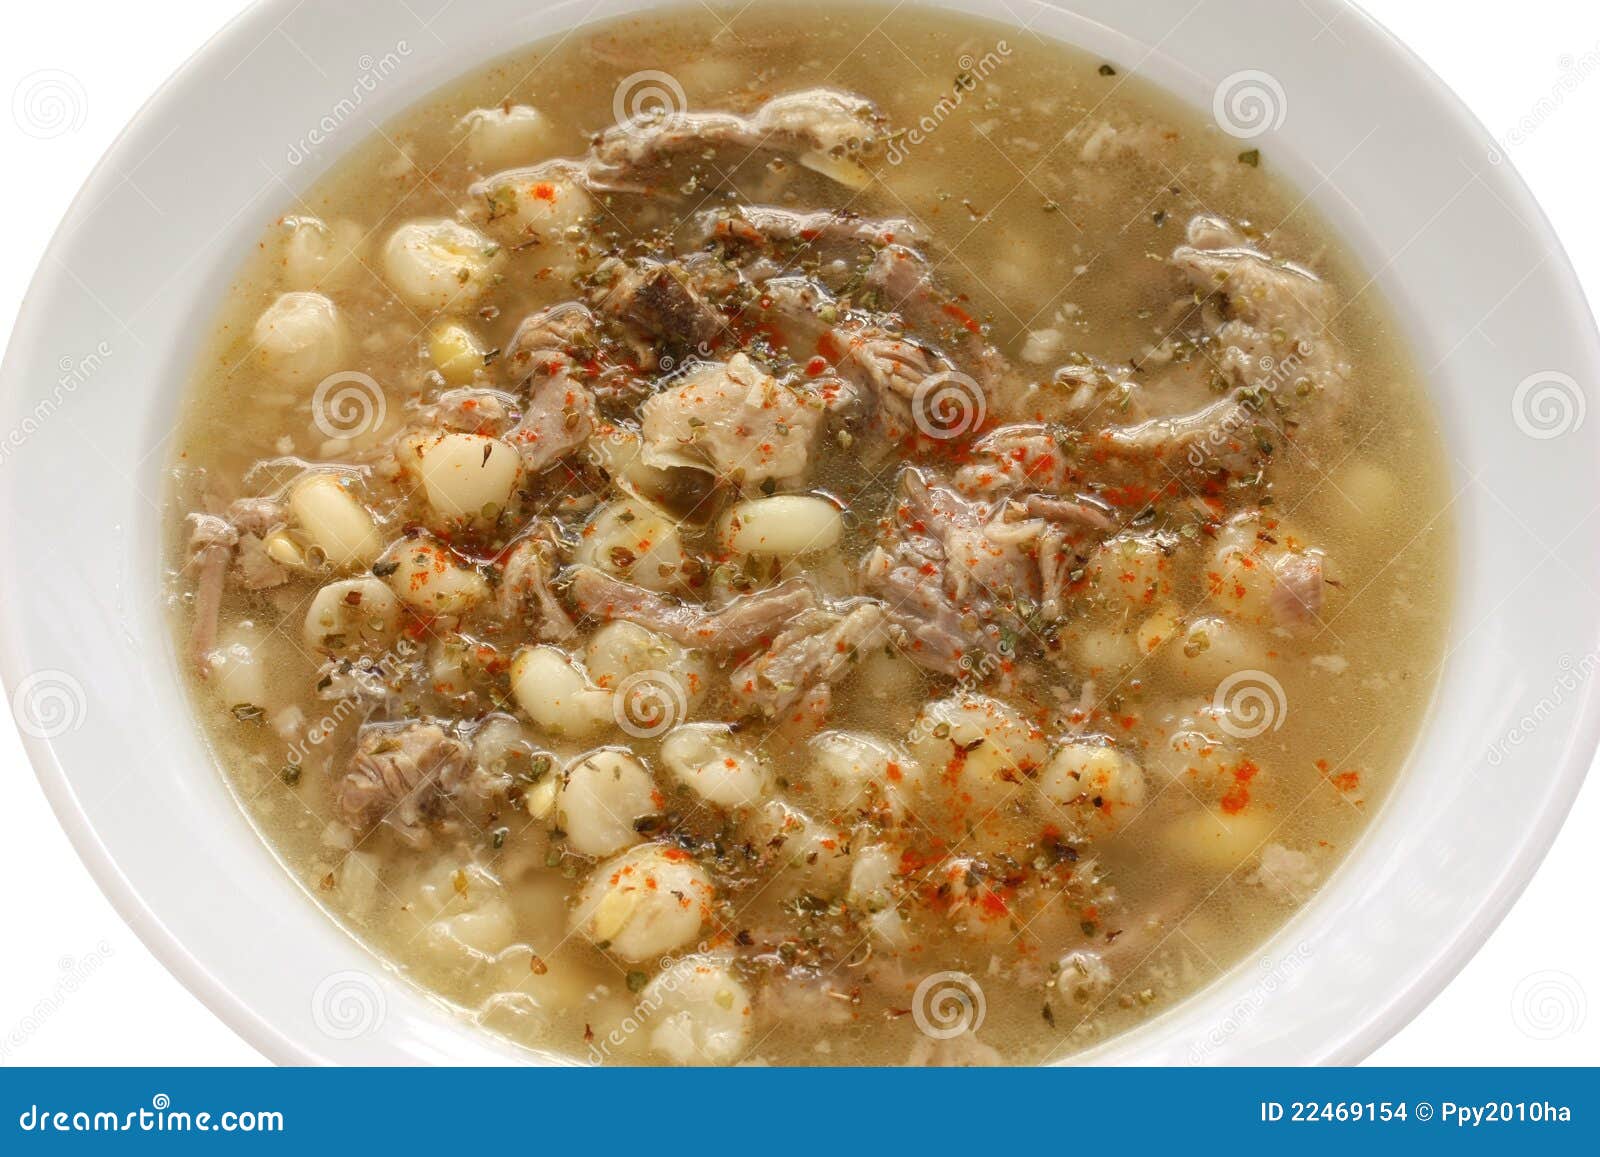 Pozole, mexican cuisine stock photo. Image of chili, christmas - 22469154